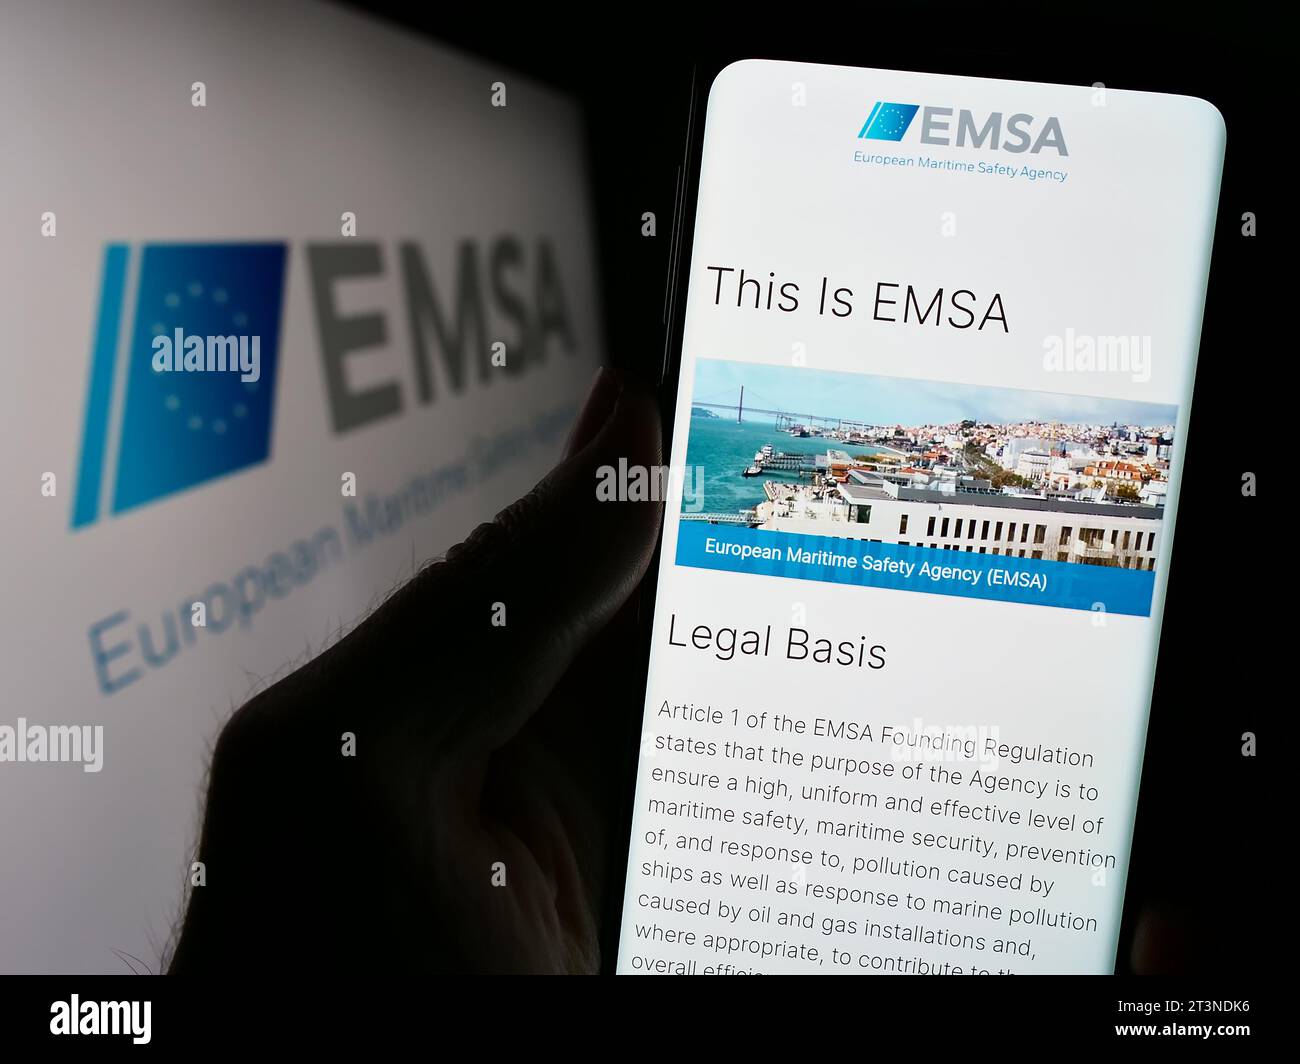 Person holding cellphone with webpage of EU institution European Maritime Safety Agency (EMSA) in front of logo. Focus on center of phone display. Stock Photo